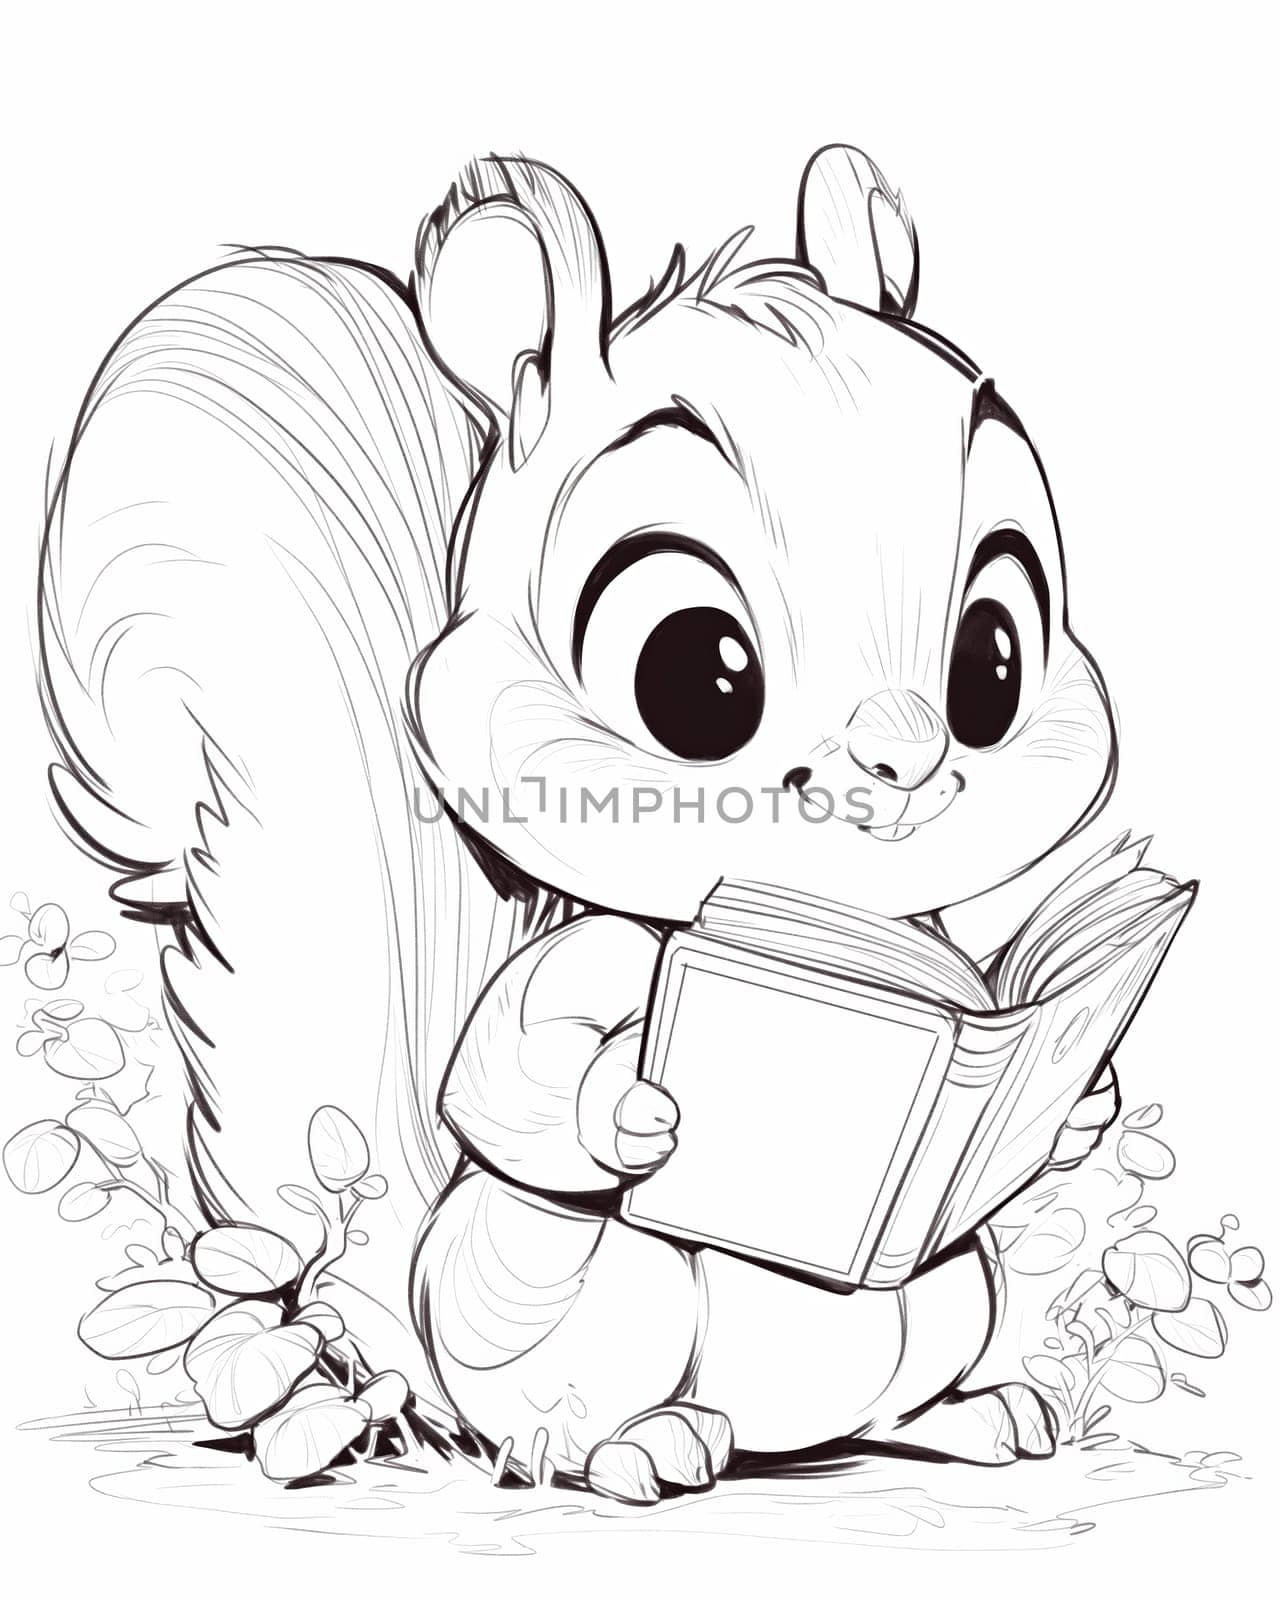 Coloring book for children, coloring animal, squirrel. Selective soft focus.